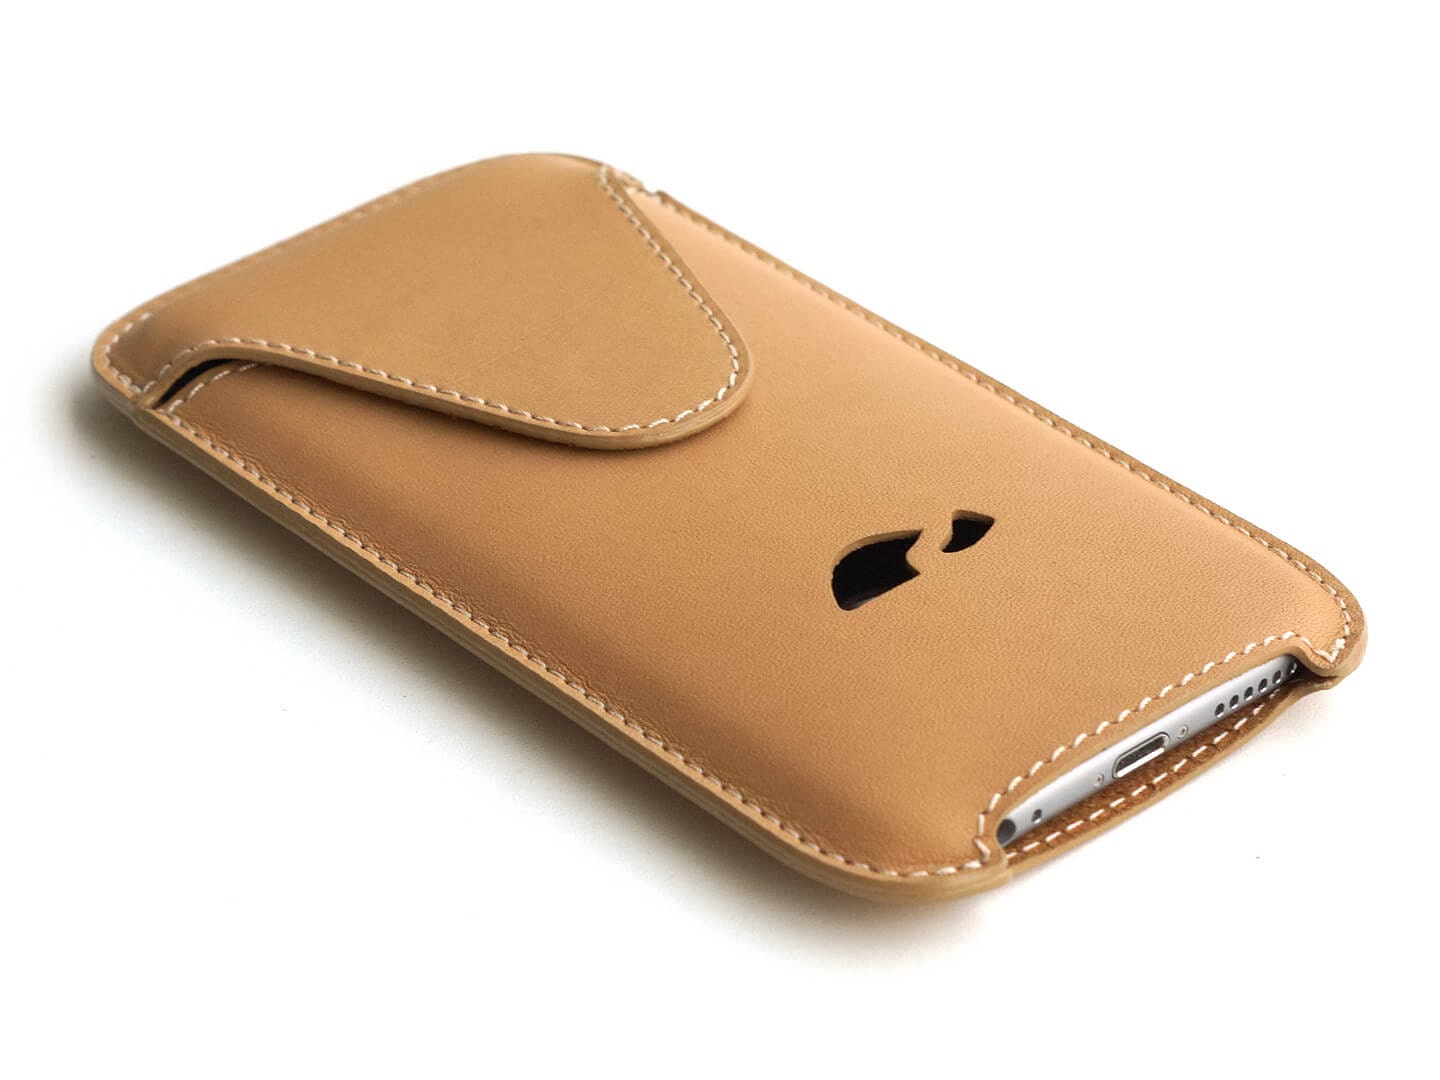 debat stoomboot Afscheiden Iphone 6 Leather Pouch Iphone 6 Leather Sleeve Iphone 6 - Etsy